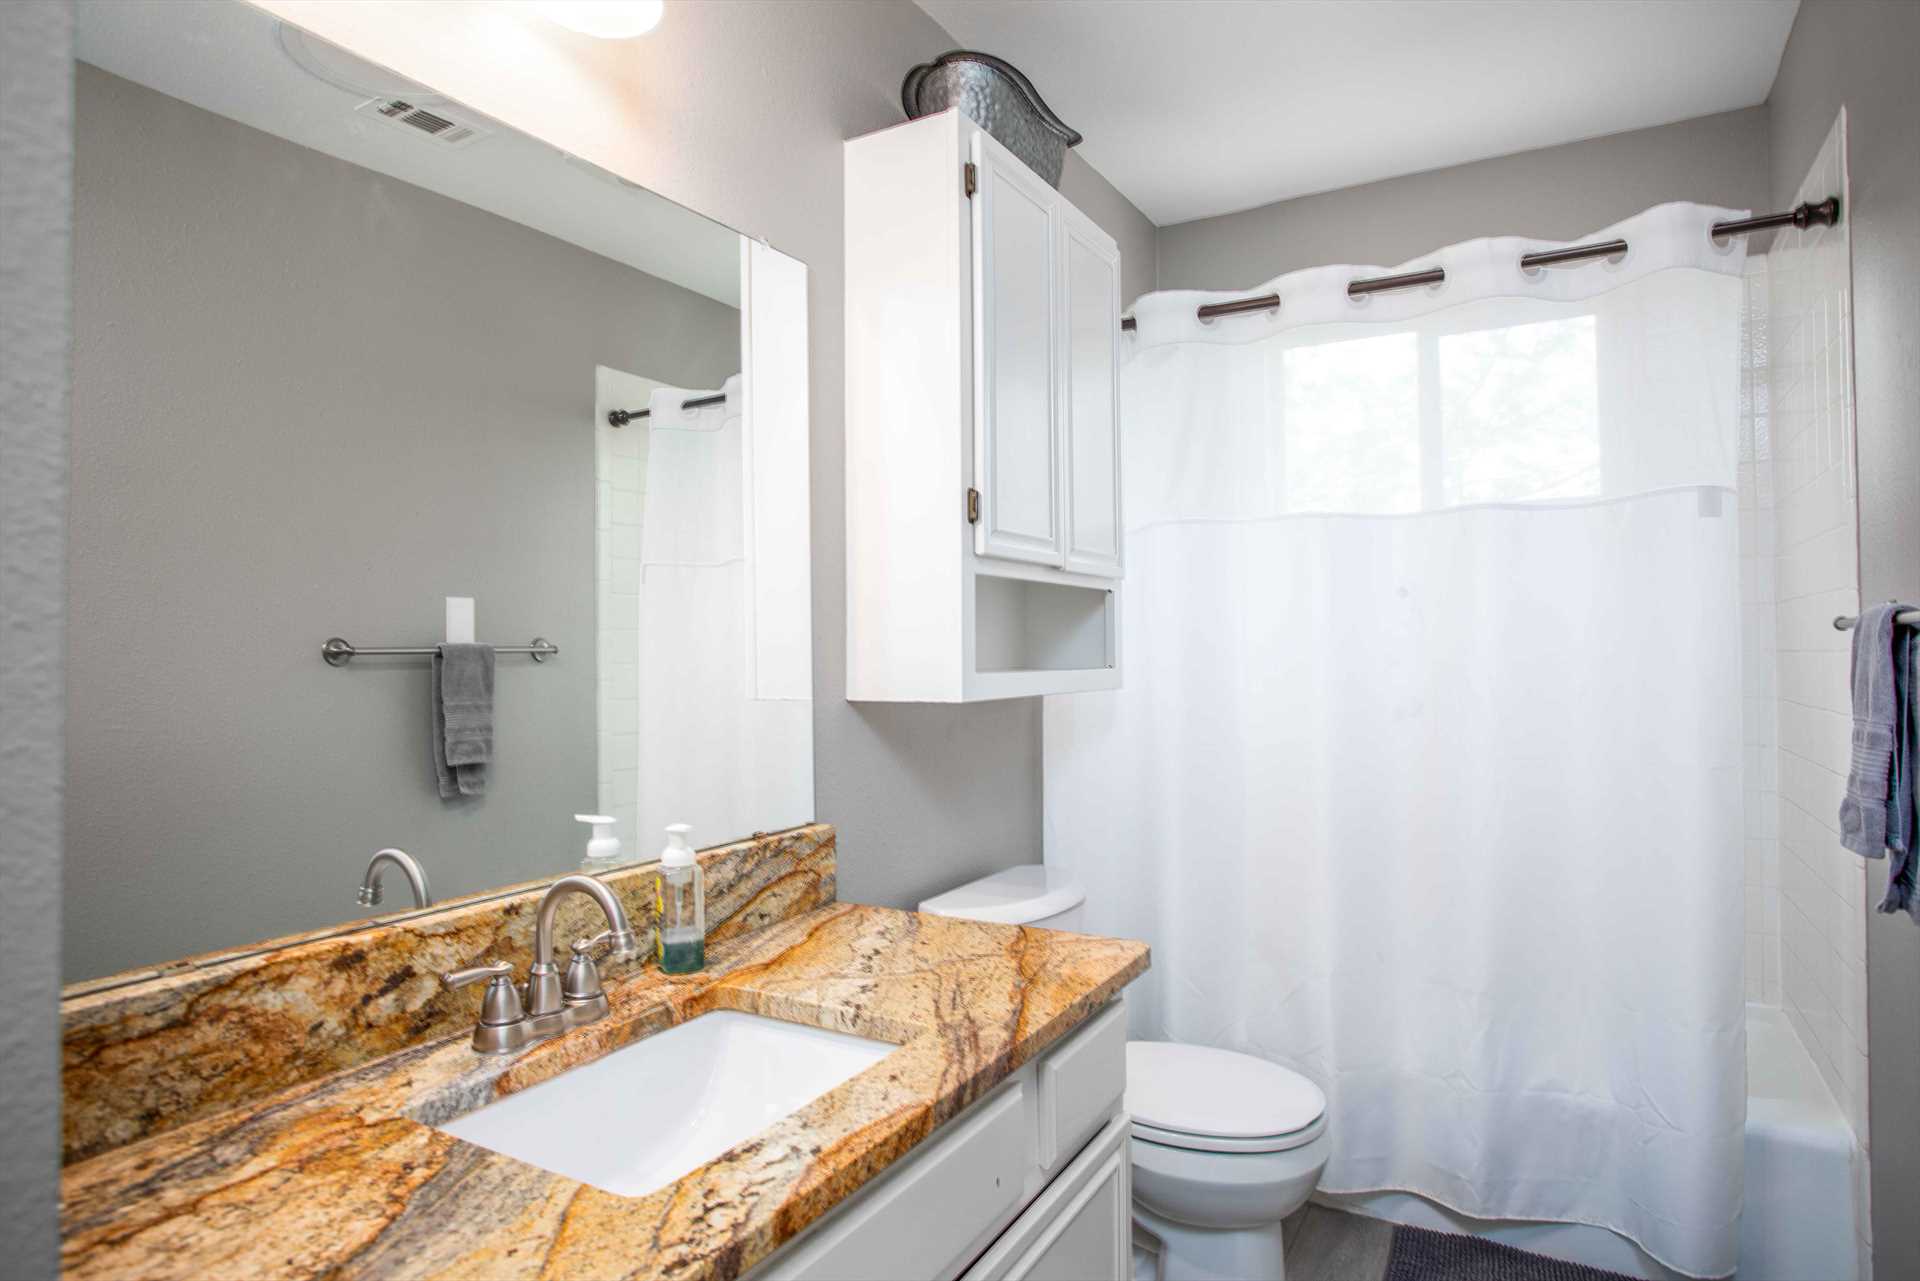                                                 The full bath features a tub and shower combo, and both baths are super-clean, with fresh linens included.